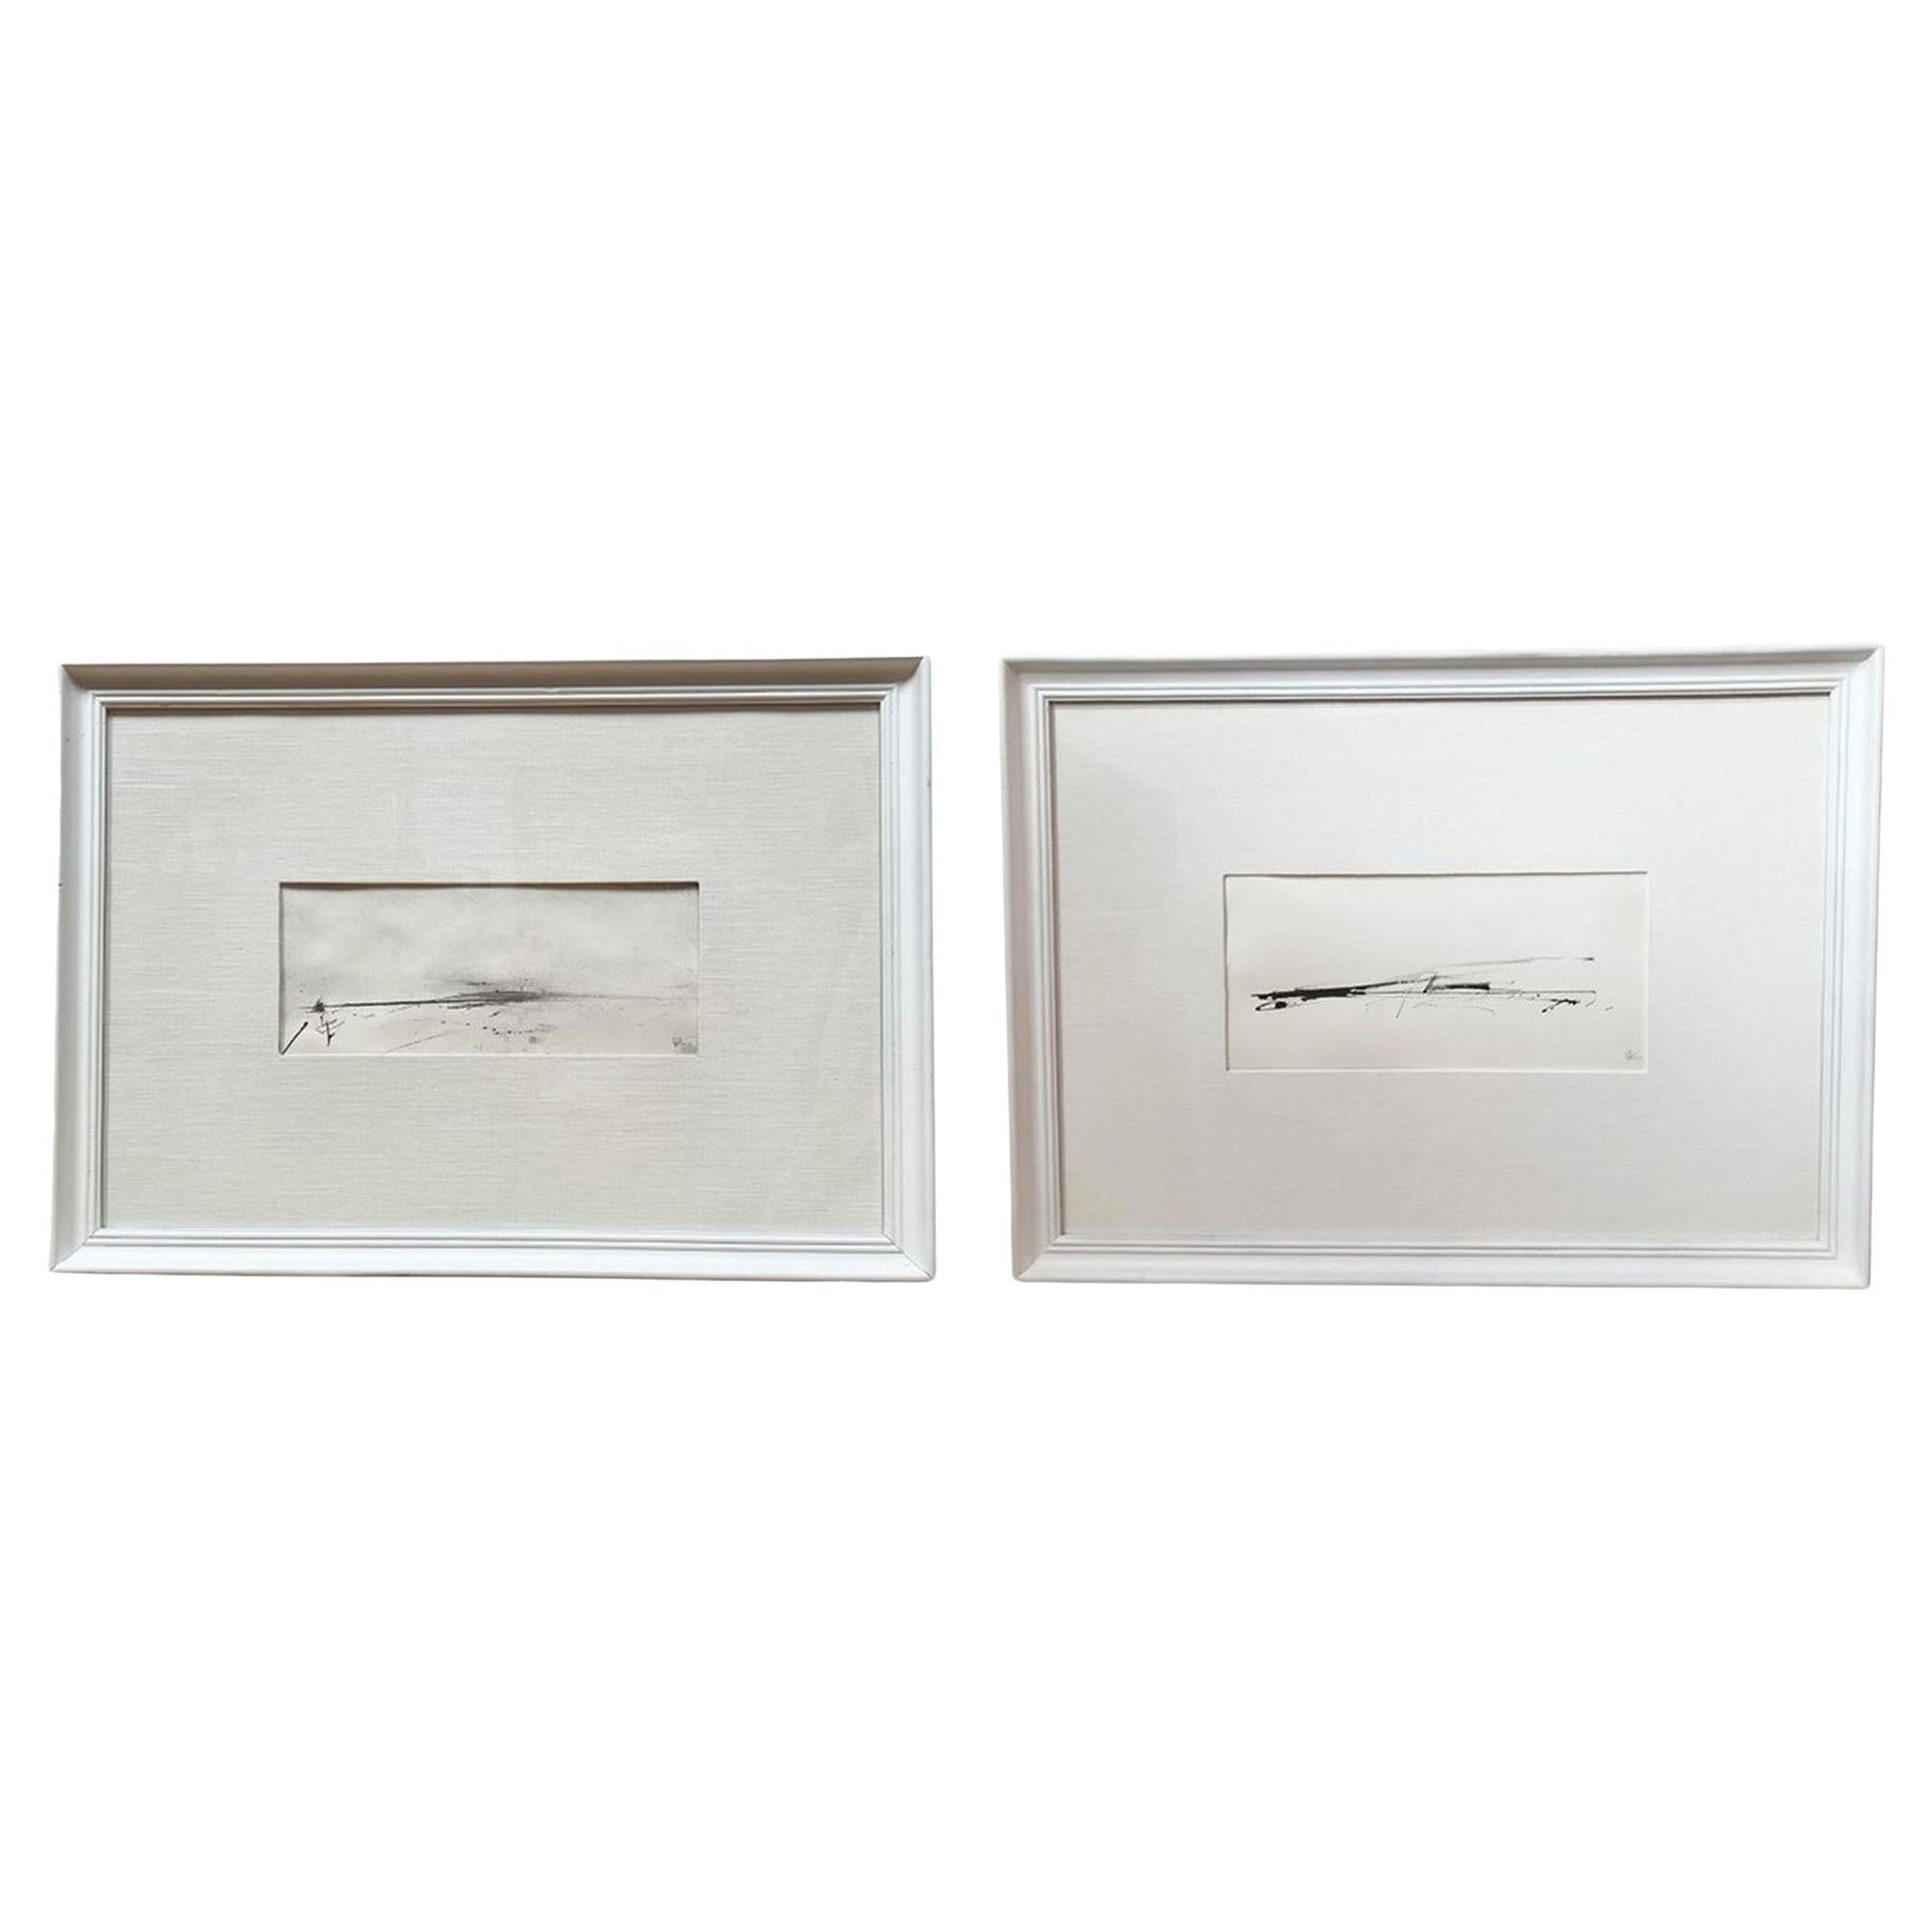 Abstract and Minimalist Pair of Drawings, Signed and Dated